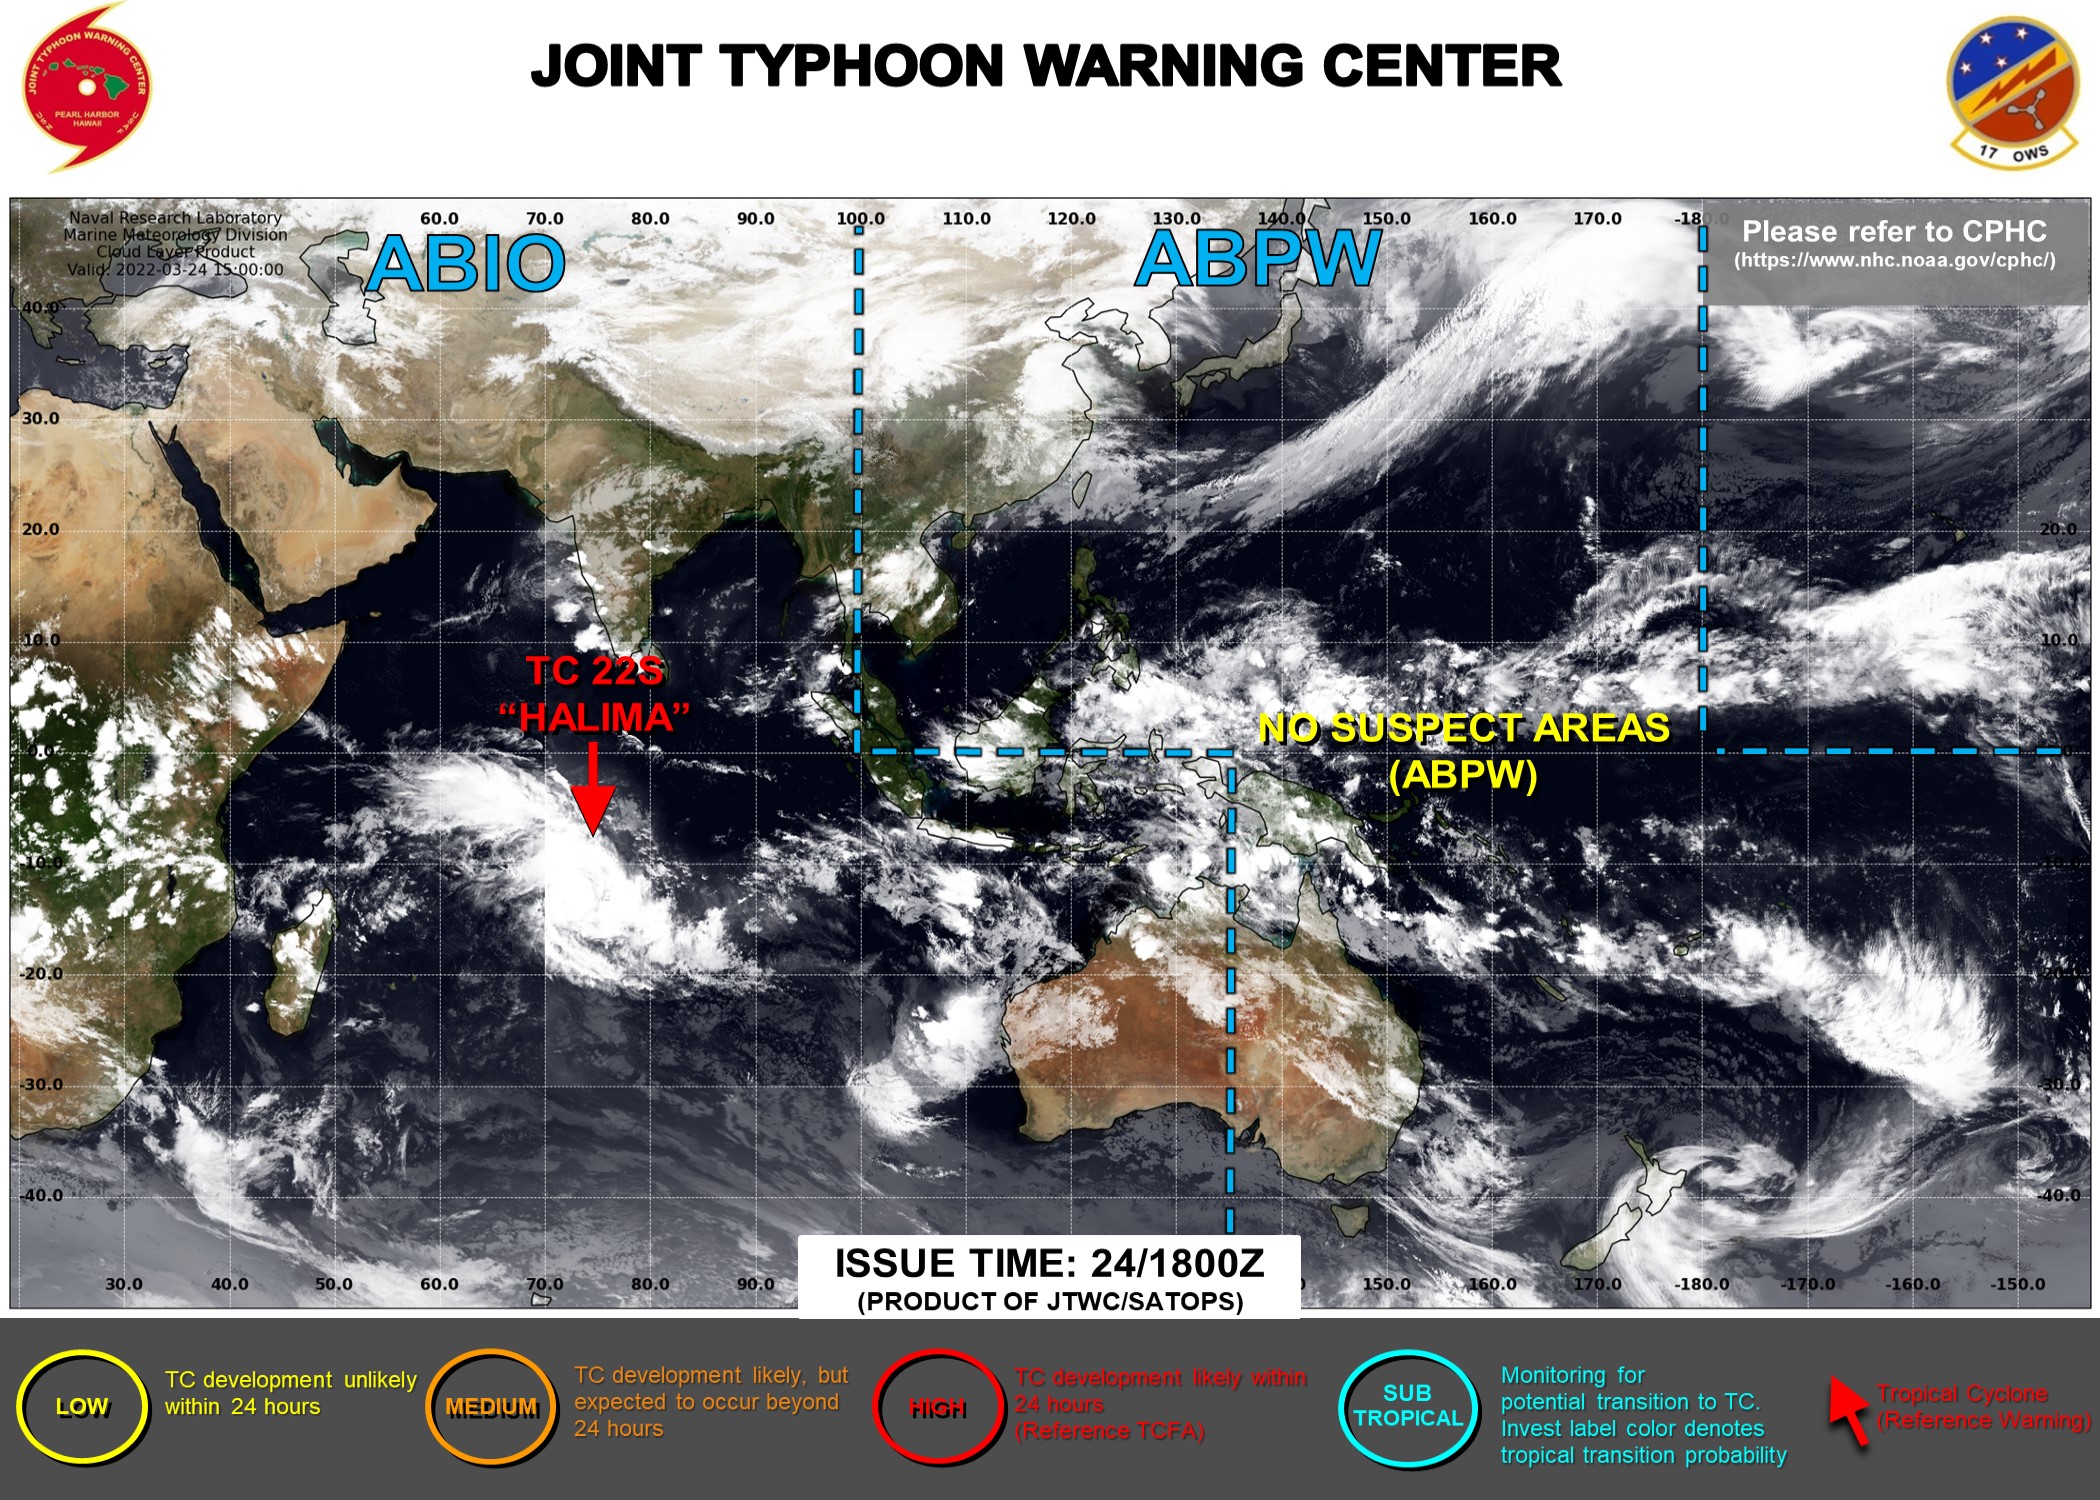 JTWC IS ISSUING 12HOURLY WARNINGS ON TC 22S(HALIMA).3HOURLY SATELLITE BULLETINS ARE ISSUED FOR TC 22S AND THE REMNANTS OF TC 21S(CHARMOTTE).